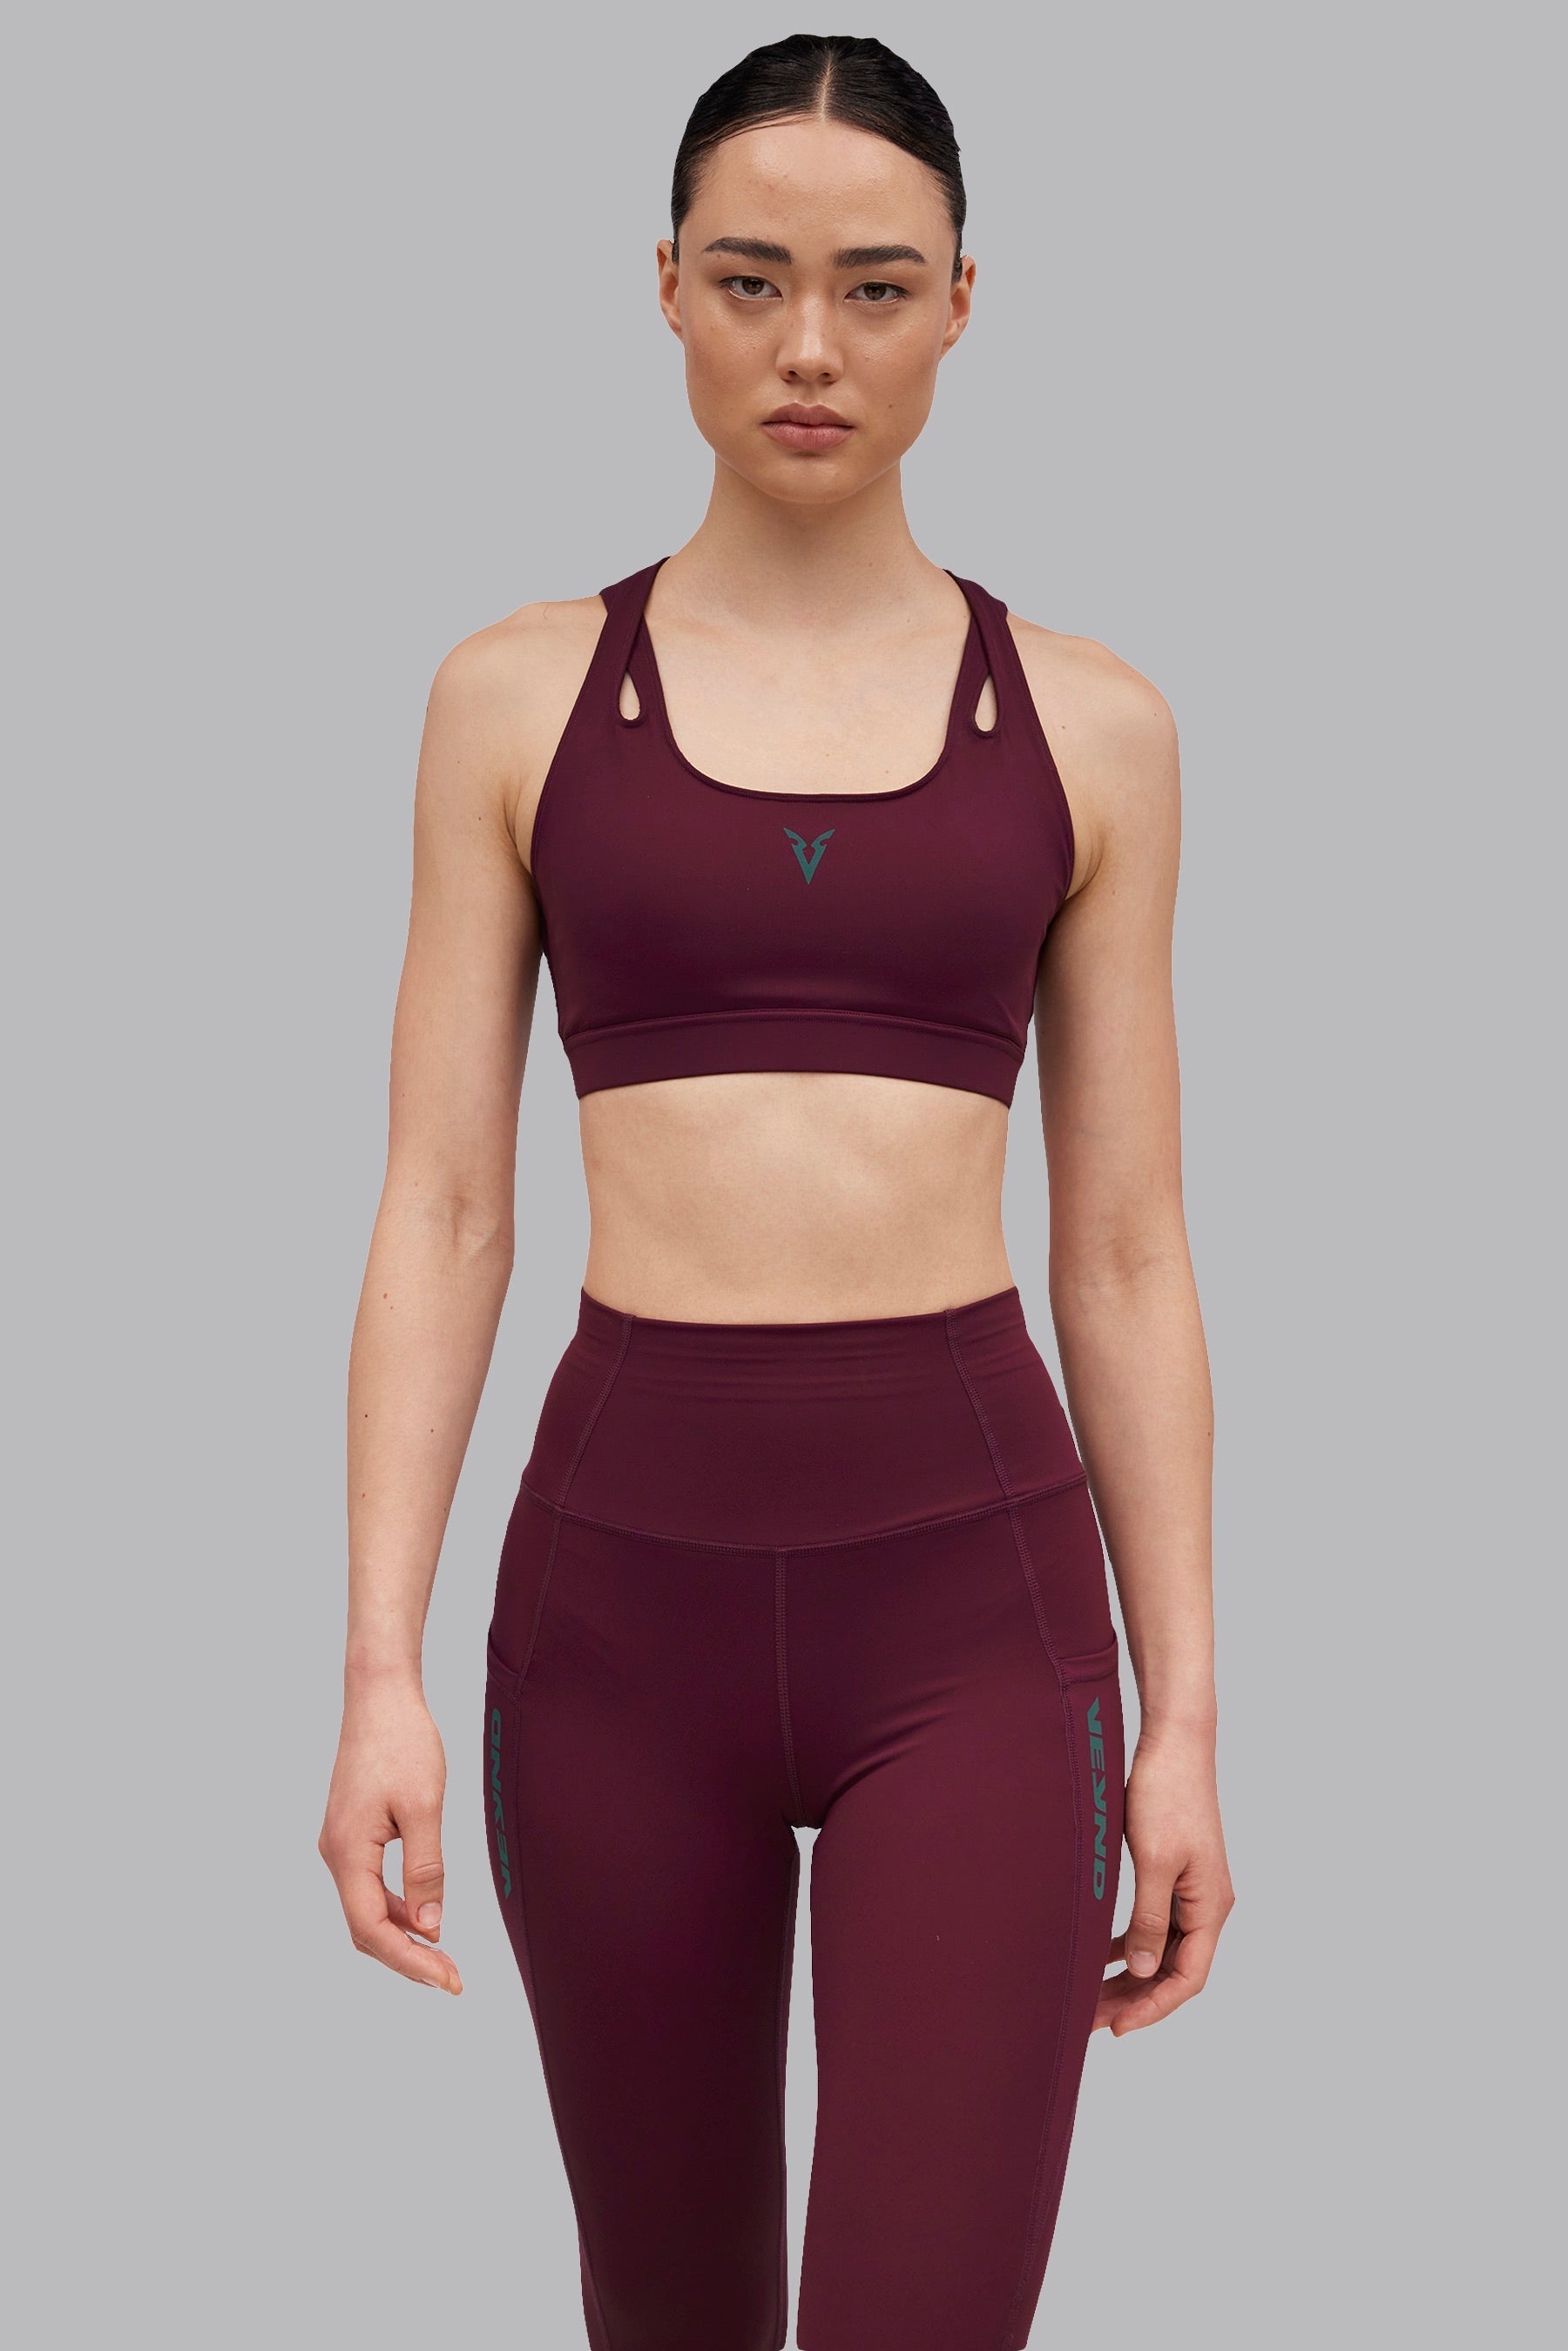 Best Workout & Athleisure Brands: Fitness Pro Guide